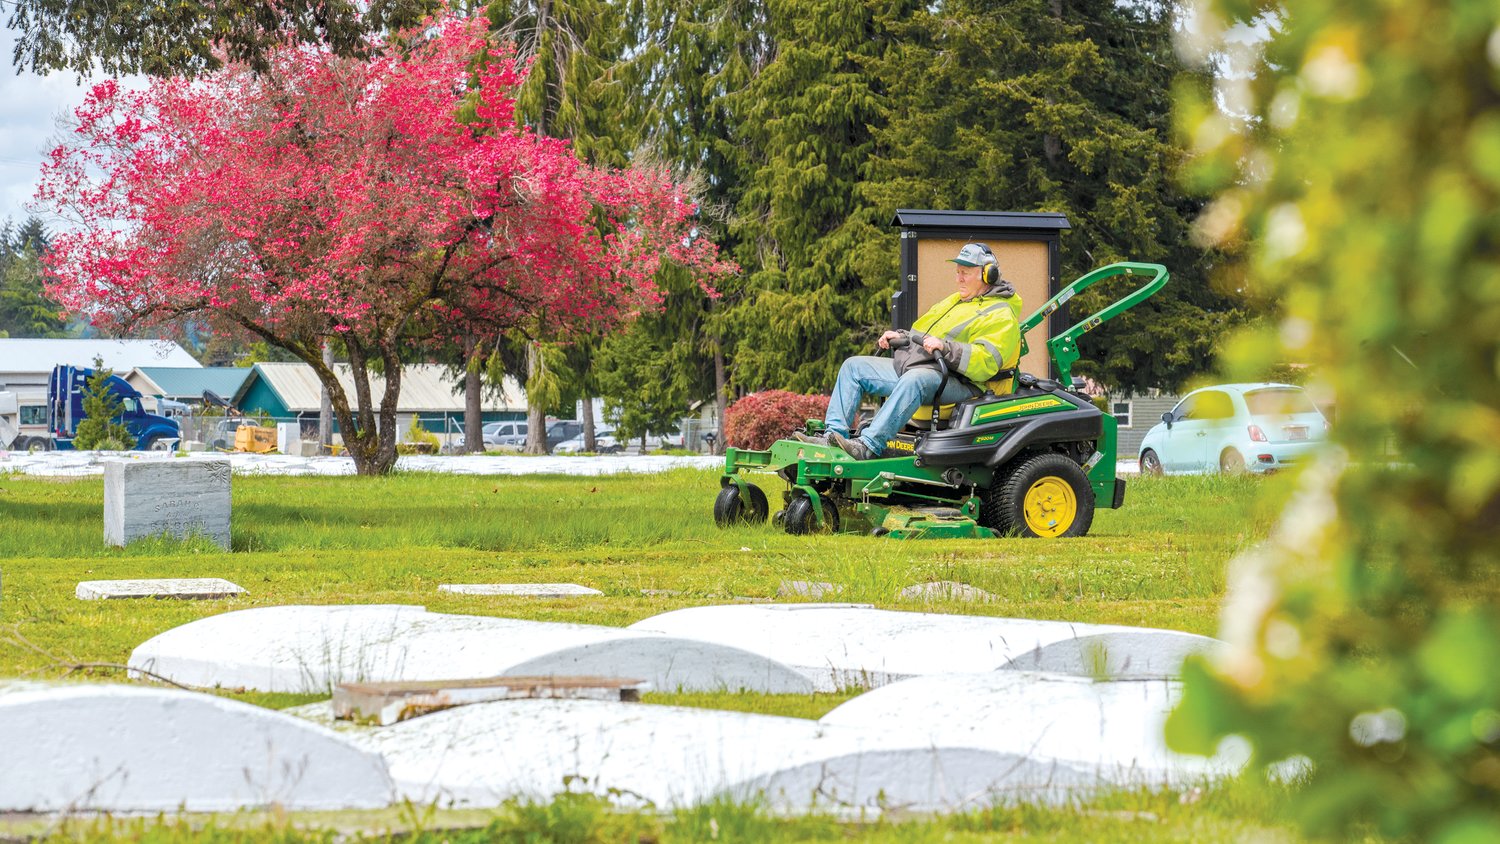 Tim O’Hara mows grass at the Greenwood Memorial Cemetary in Centralia on Friday. O’Hara lives in Olympia and has worked for the Centralia Parks Department for approximately 30 years.